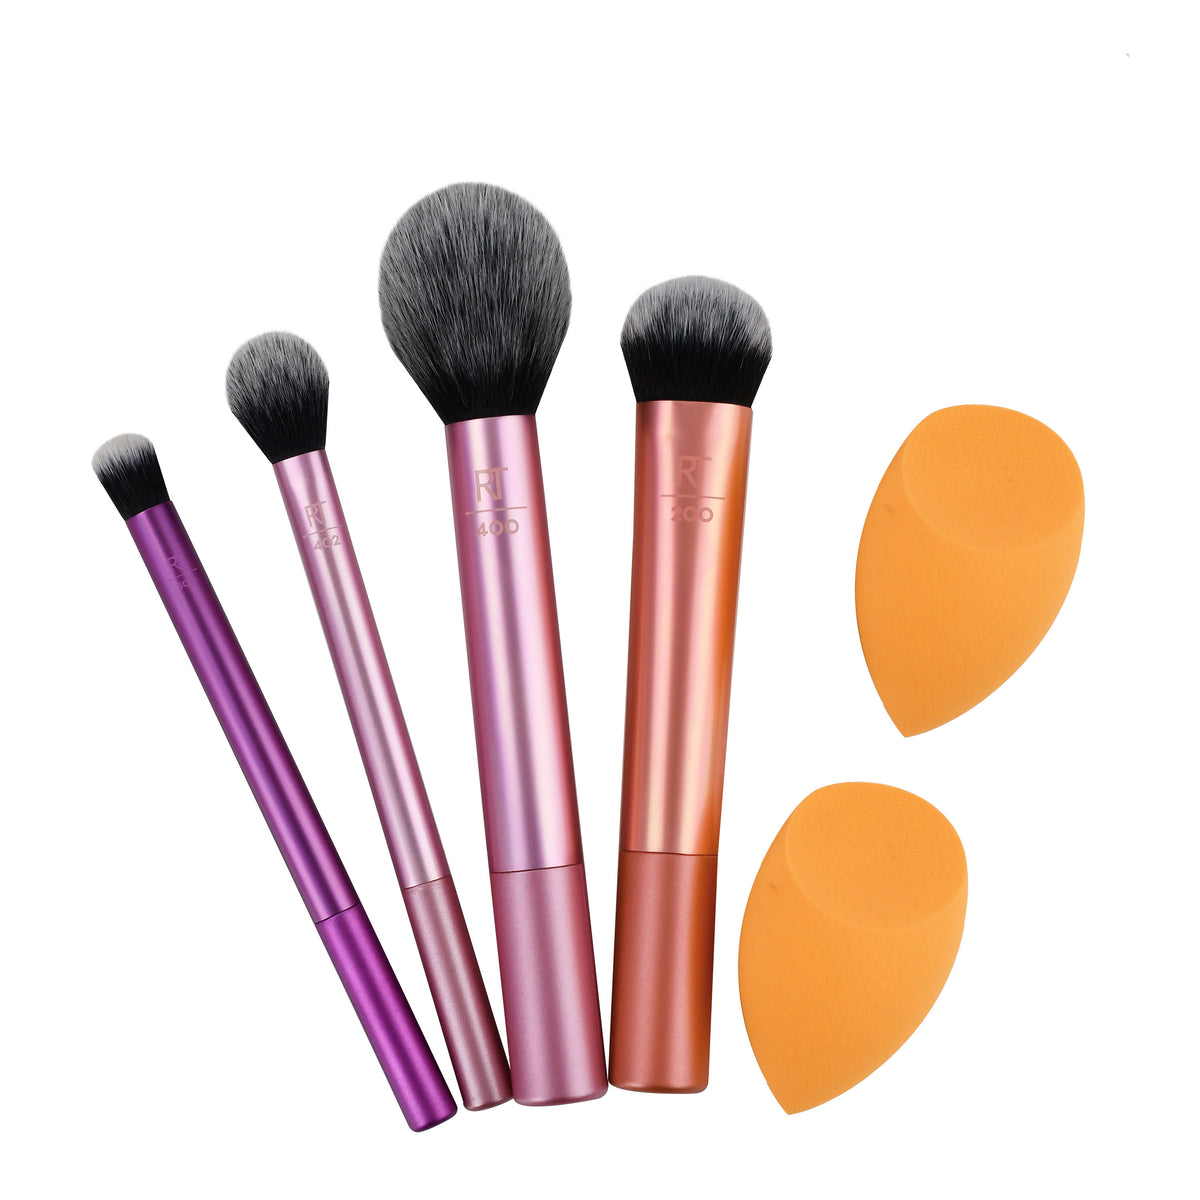 Real Techniques Makeup Brush Set With 2